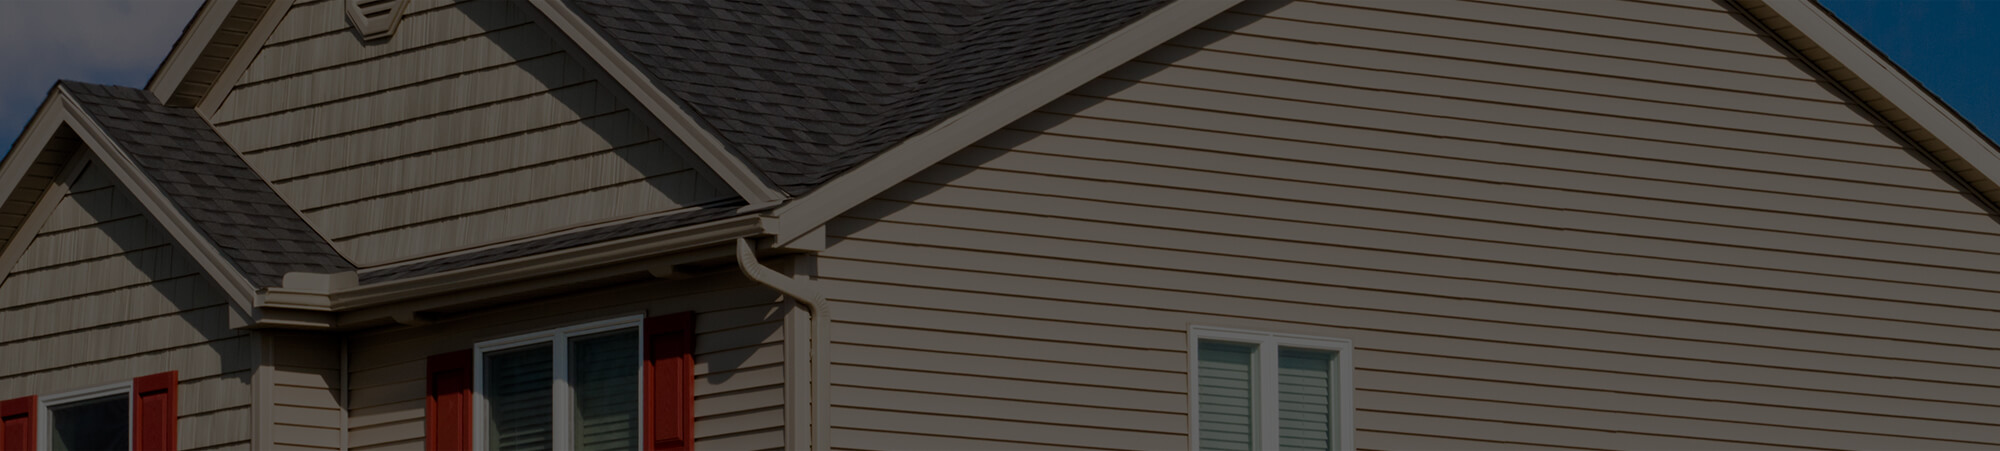 siding installation and replacement services in grand chute wi